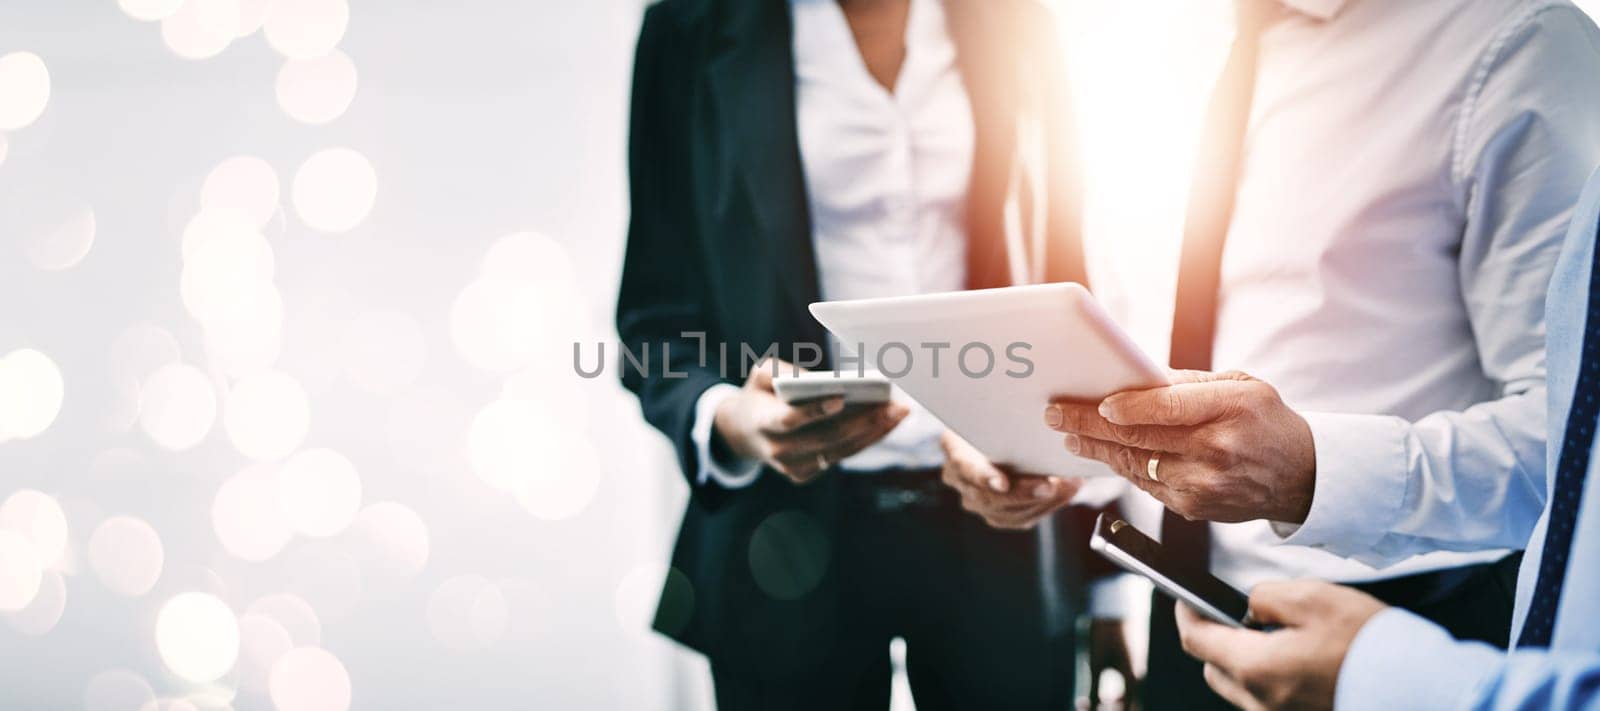 Hands, technology and double exposure with business people together for communication or networking closeup on space. Collaboration, tablet and phone with a professional employee team working online.